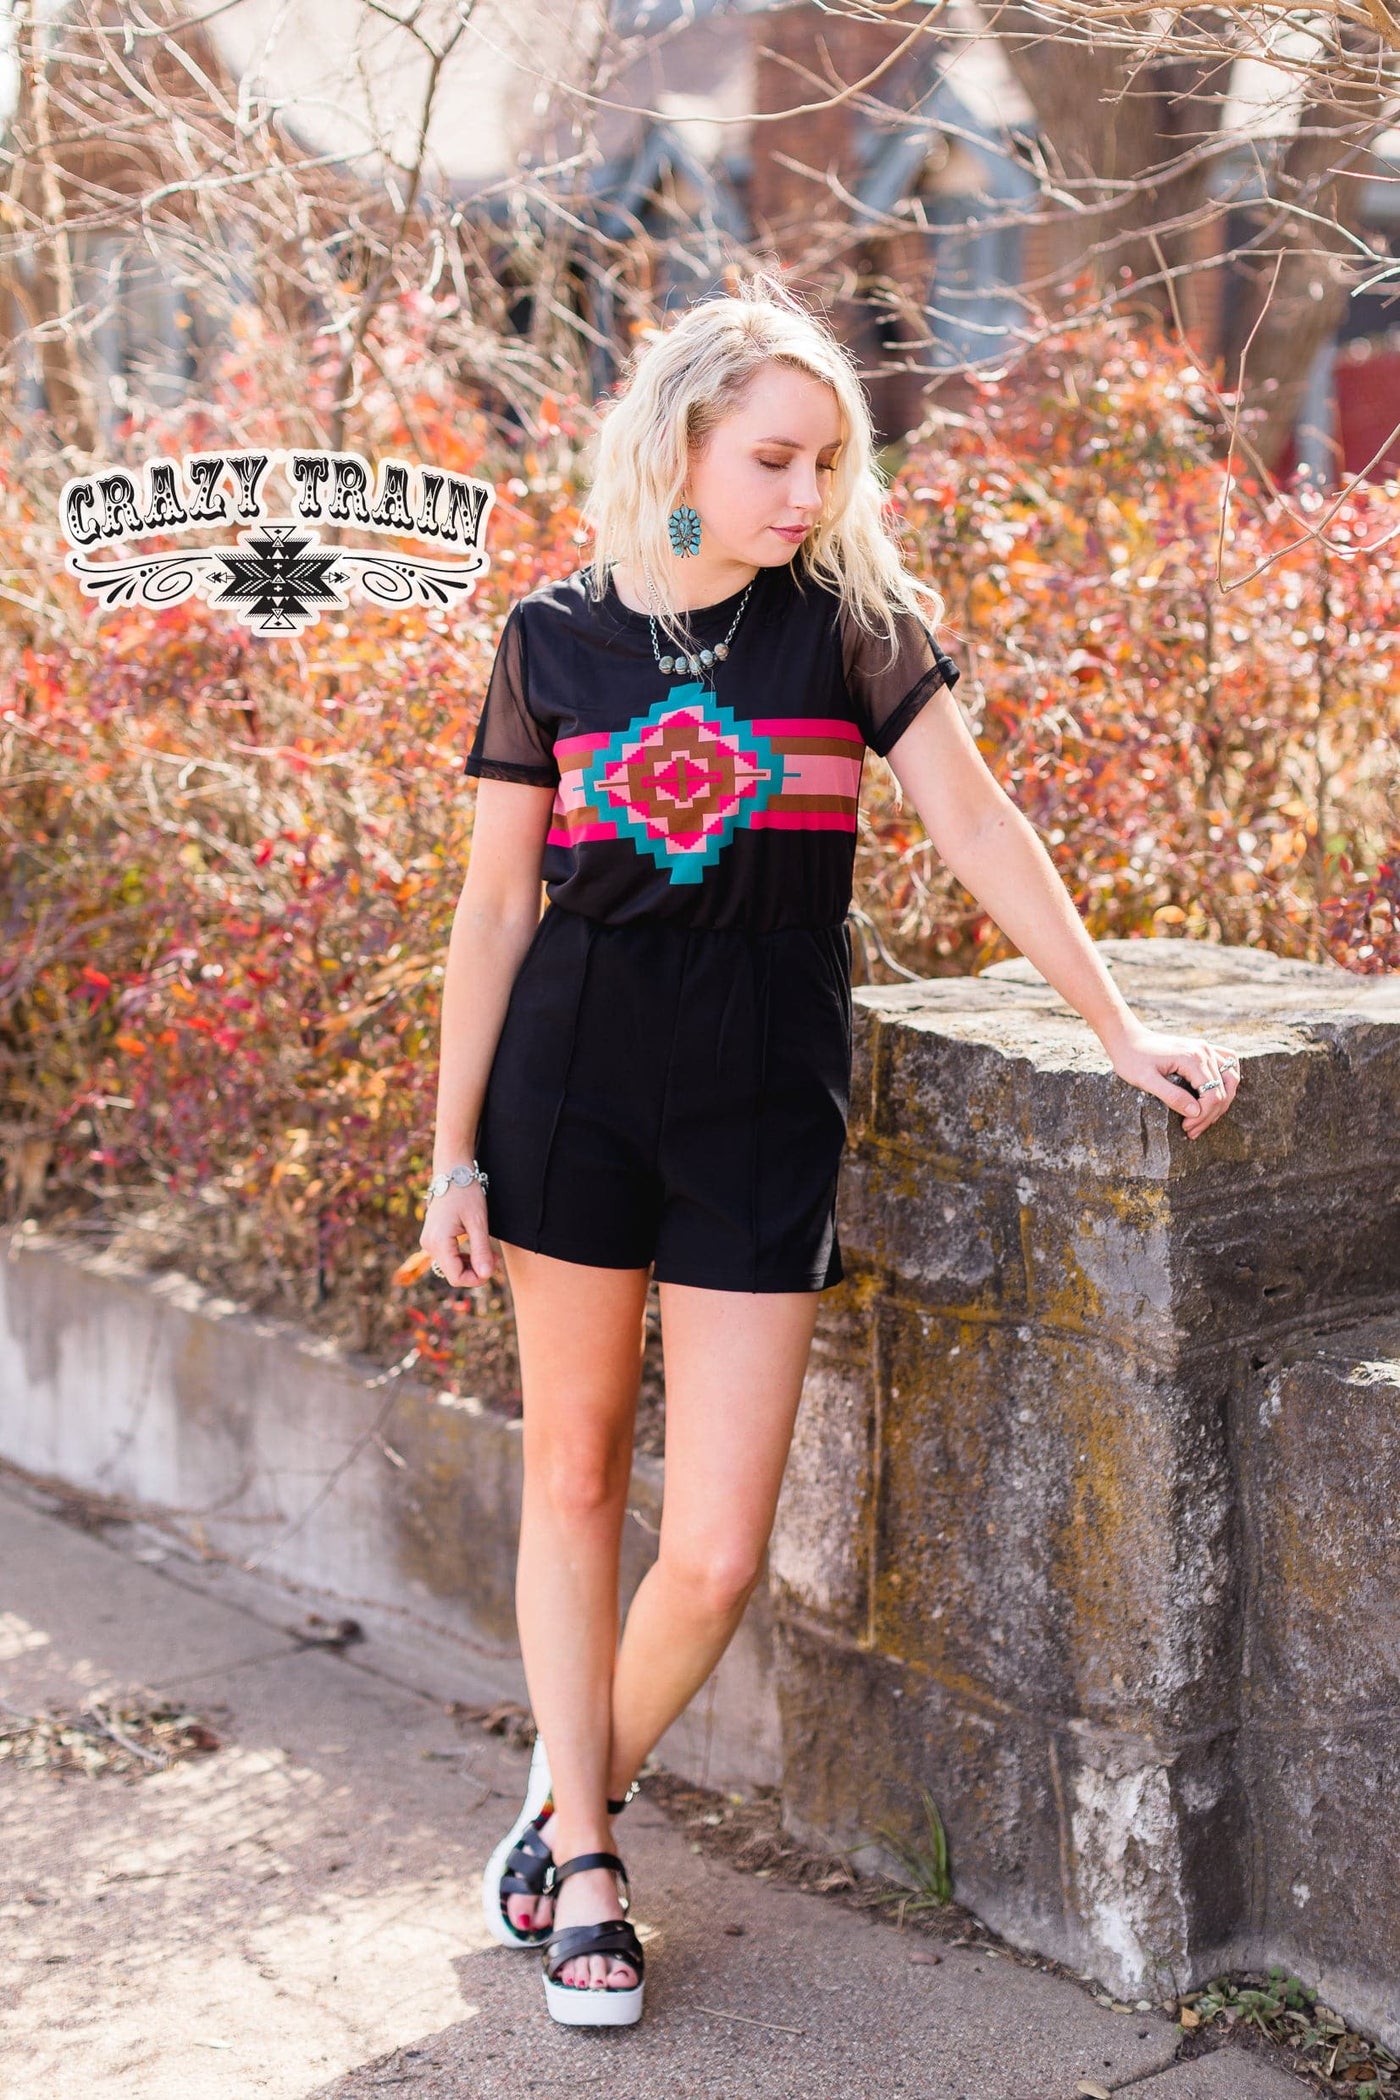 Romper  The Ranch Romper from Crazy Train Clothing